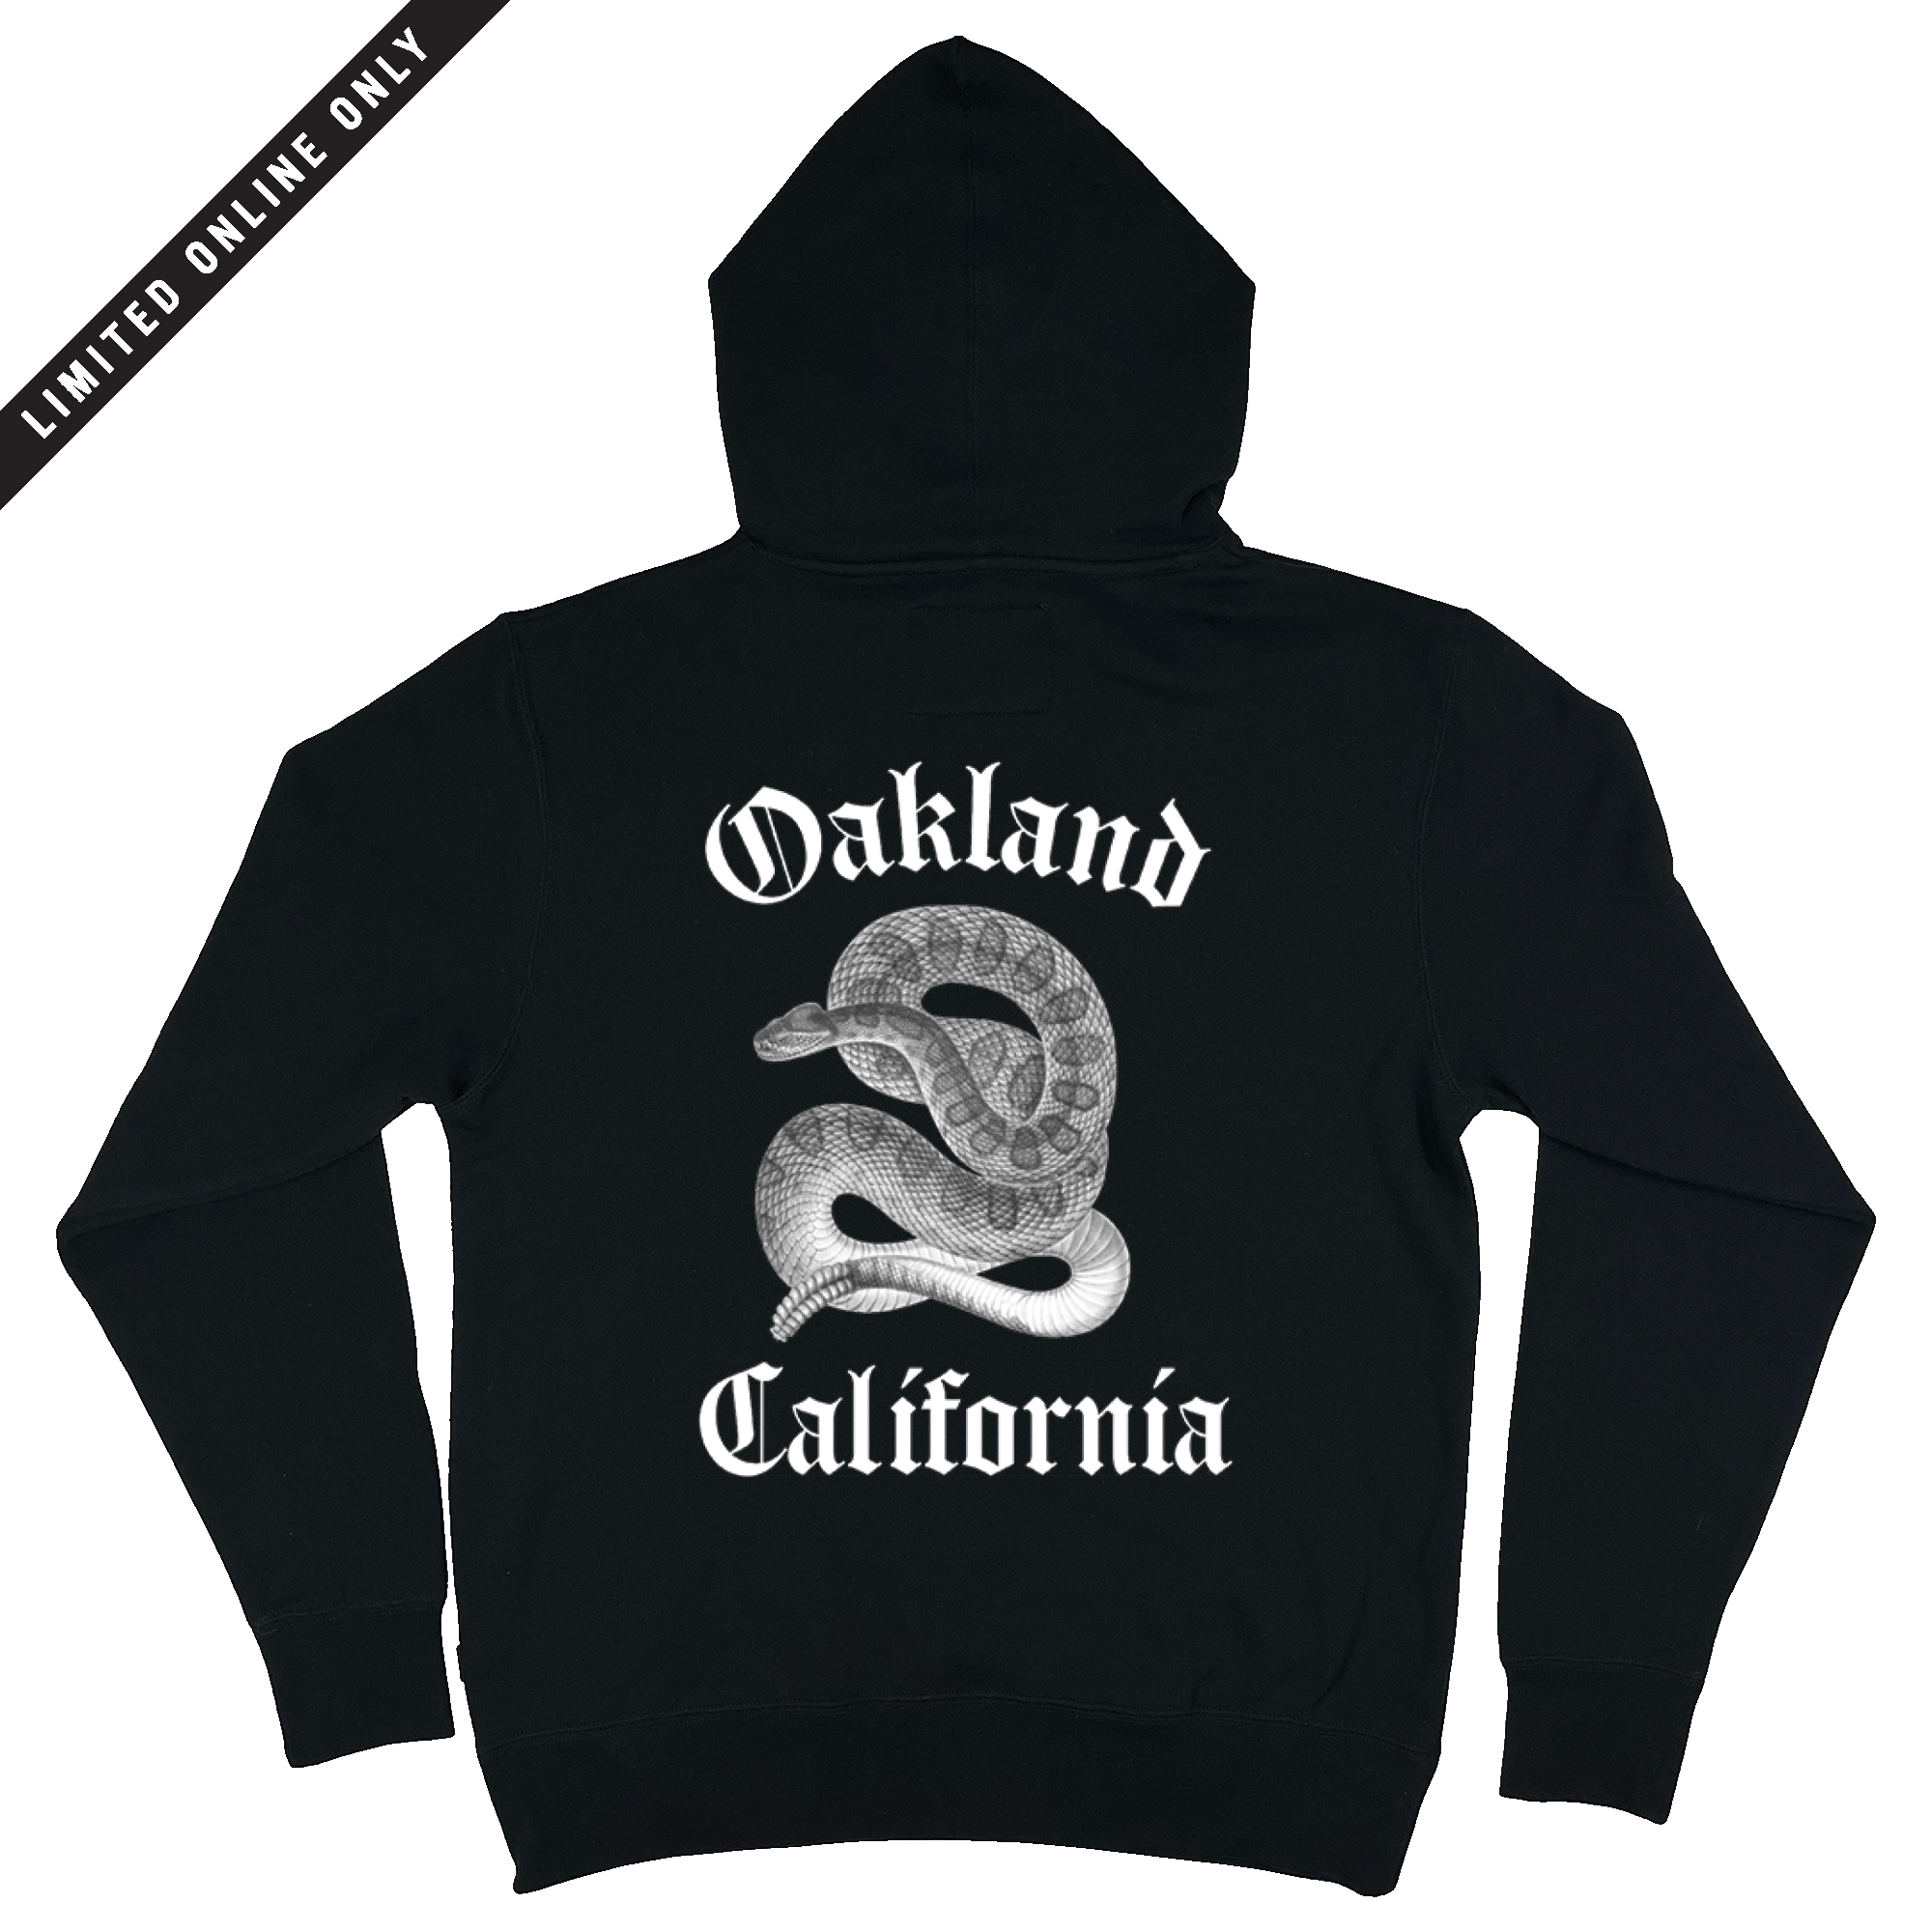 Back view of black pullover hoodie with Oakland California text and snake with Limited Online Only sash.